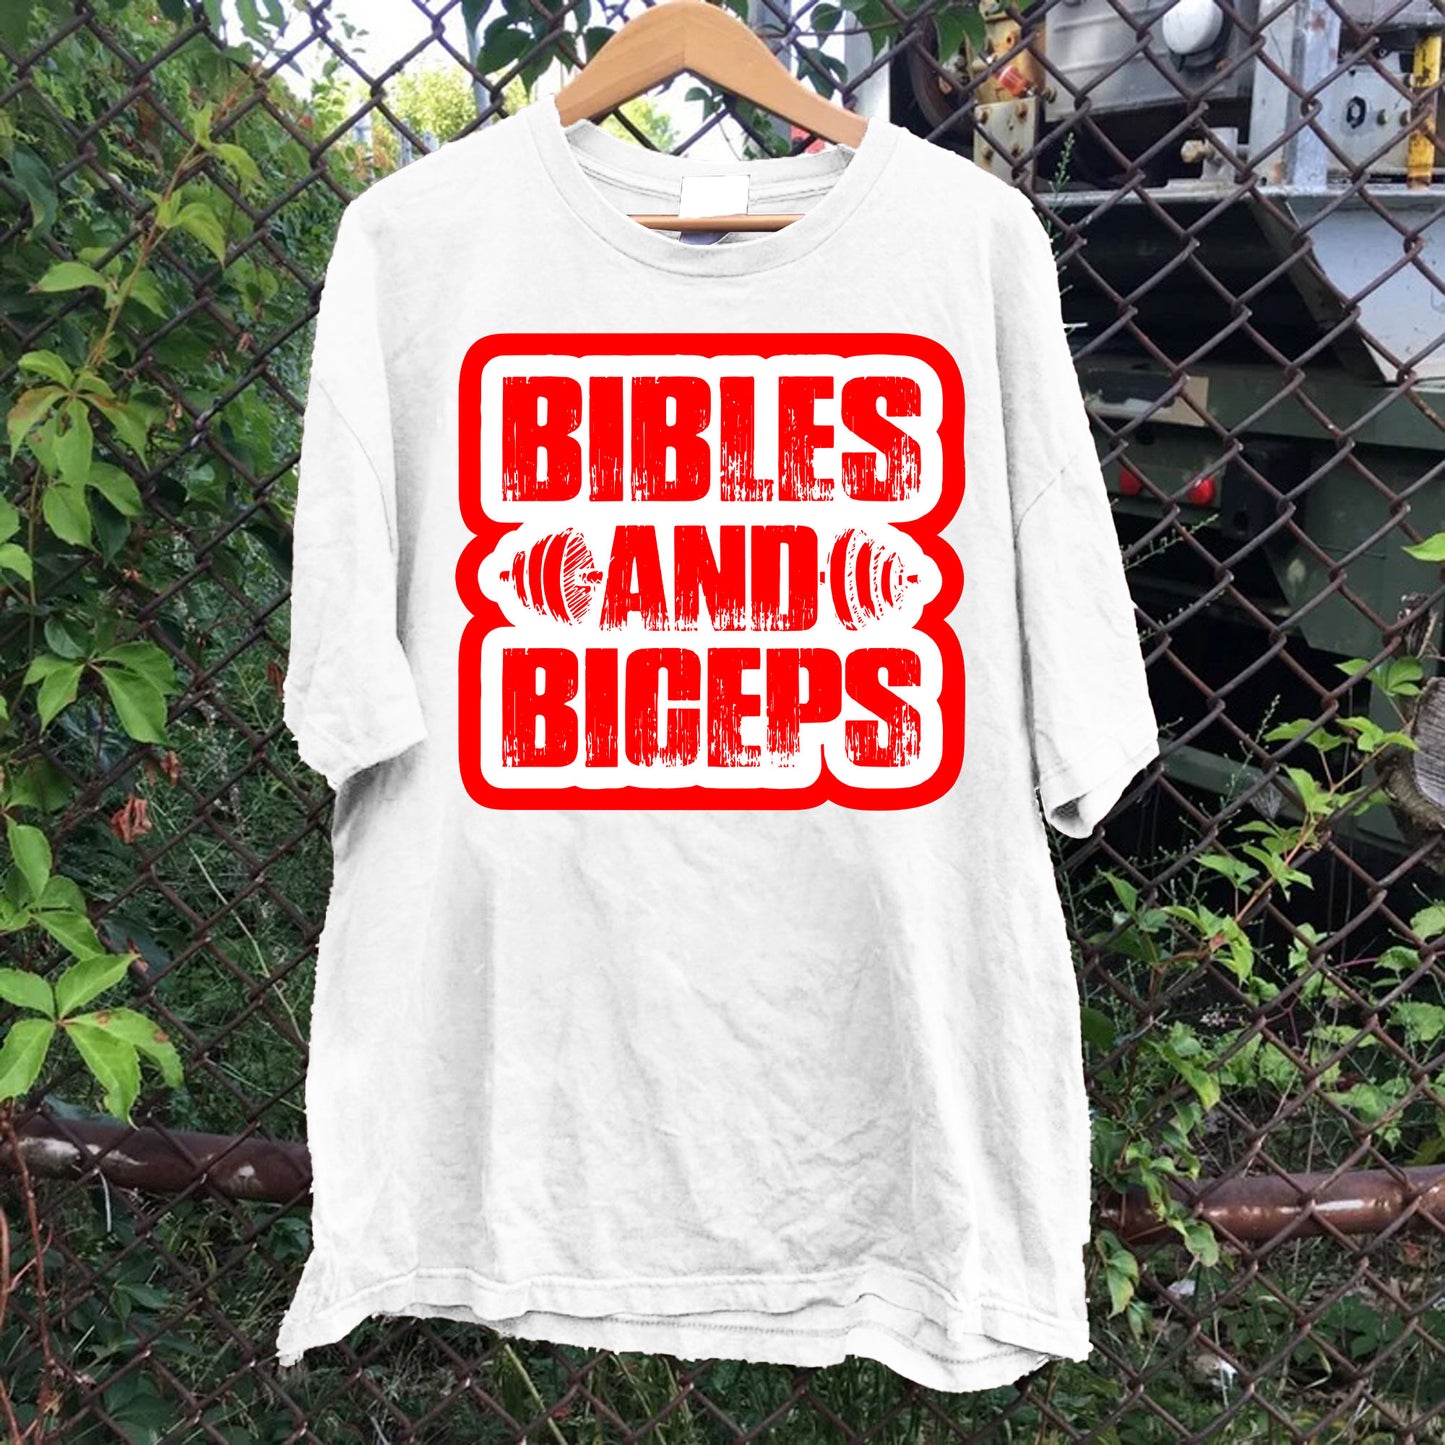 Bibles And Biceps Tee